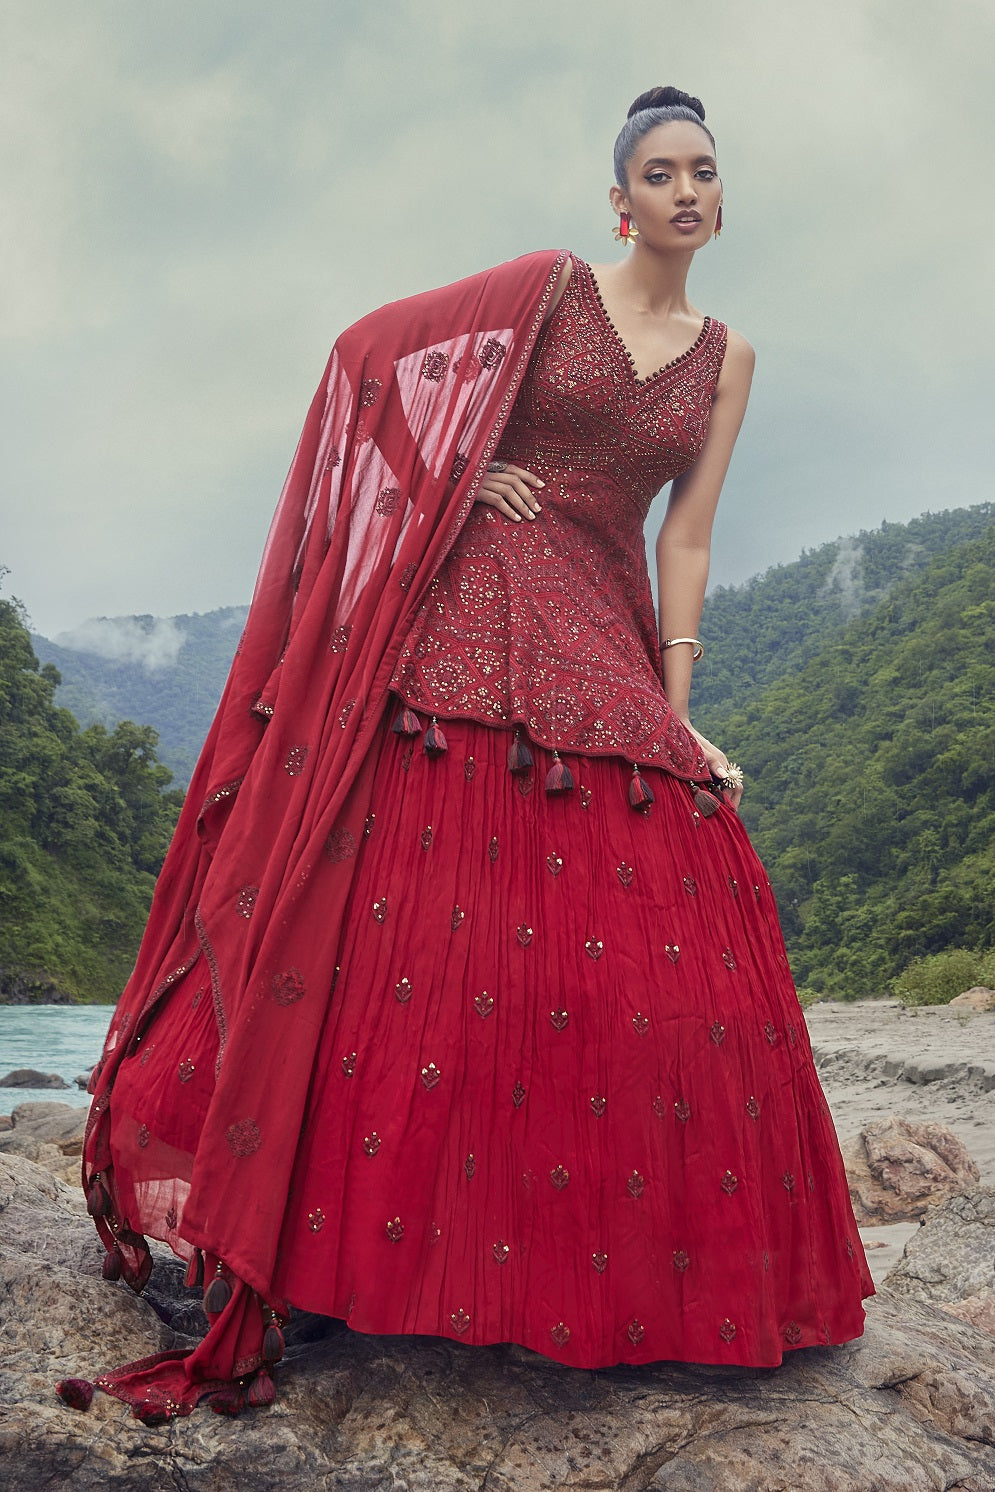 Shop this beautiful red lehenga with embroidered peplum choli. The lehenga is perfect for weddings and sangeet parties. Shop online from Pure Elegance